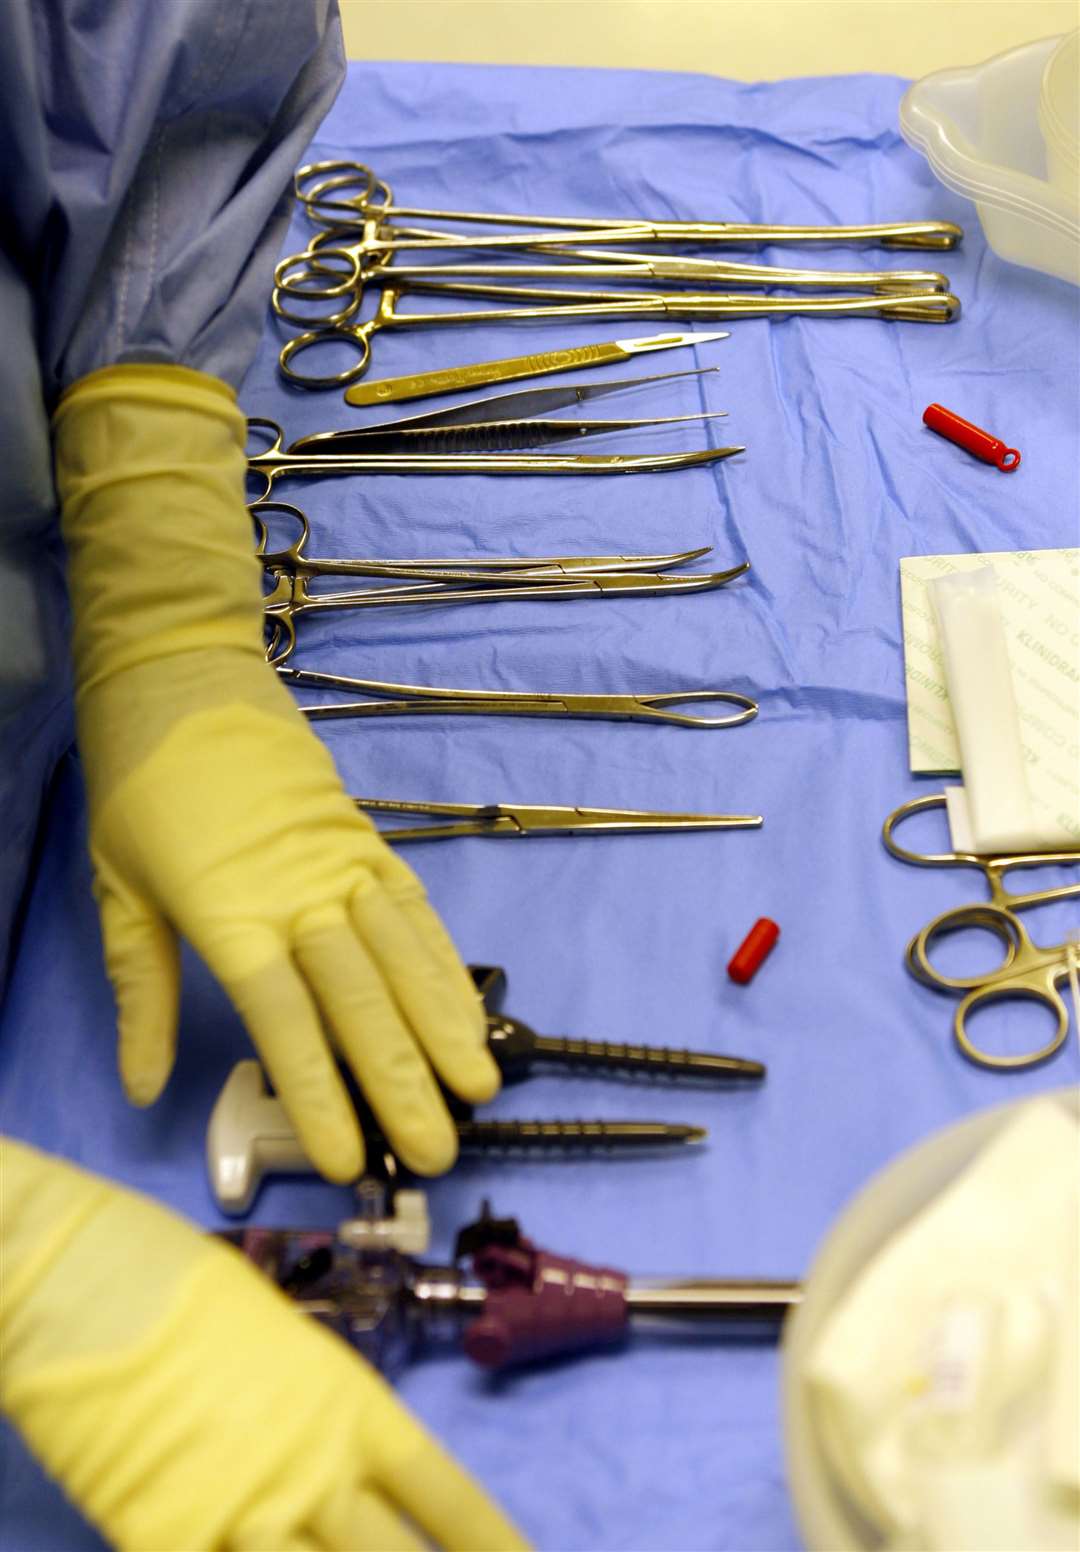 Leaving an object inside a patient after surgery is classed as a ‘never event’ by the NHS and there are strict procedures to try to prevent such errors (Chris Ison/PA)